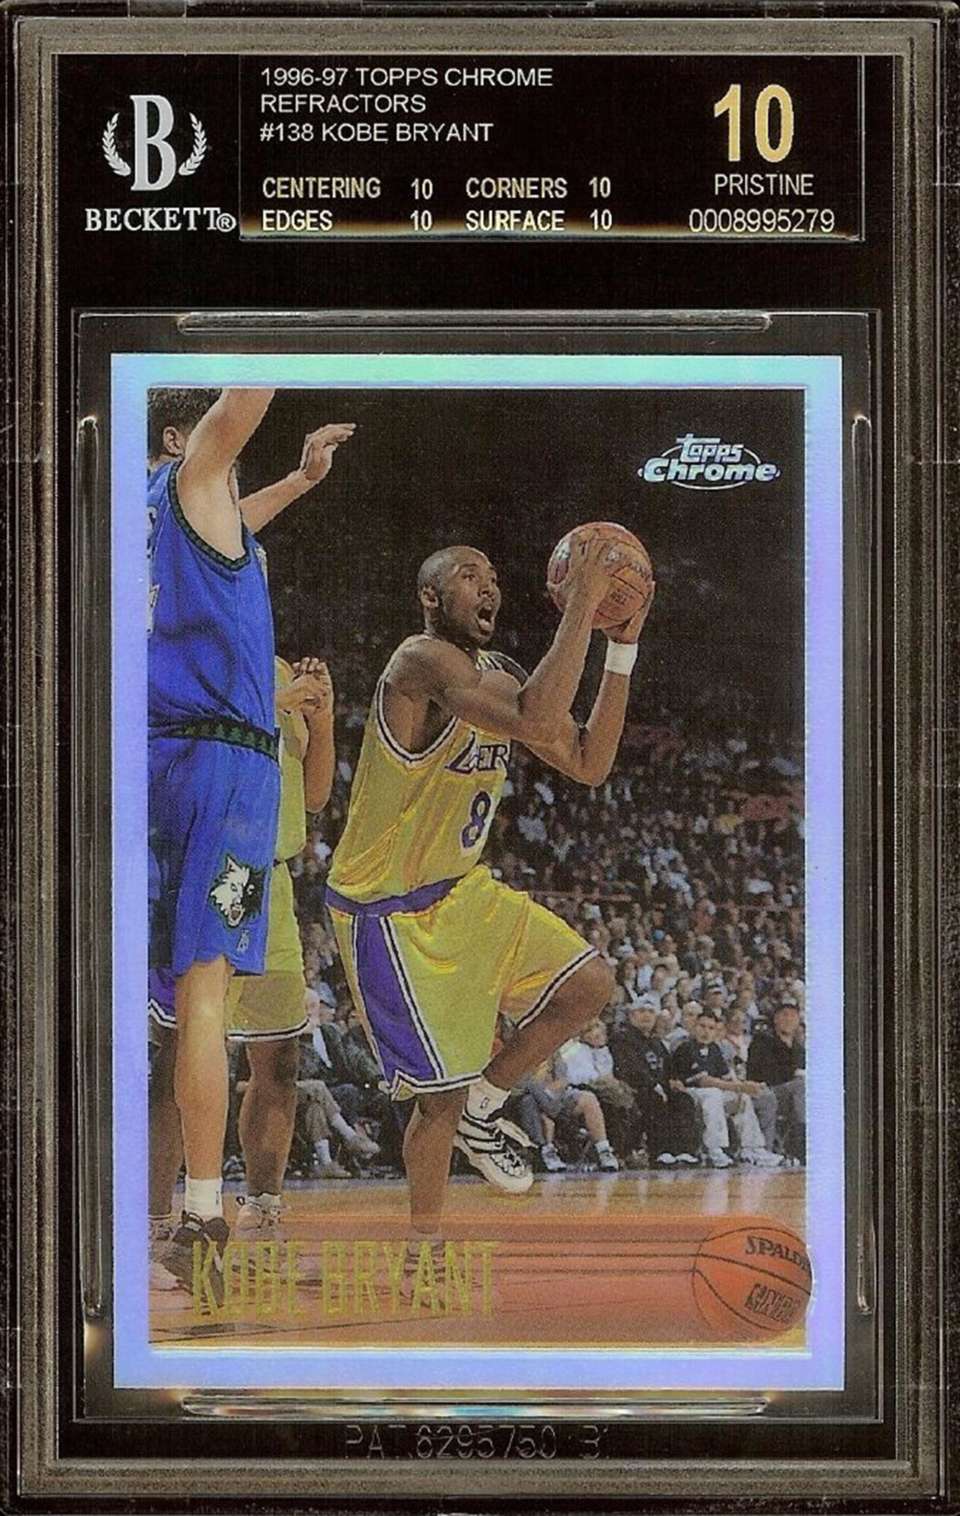 LeBron James rookie card and the top ten most valuable basketball cards